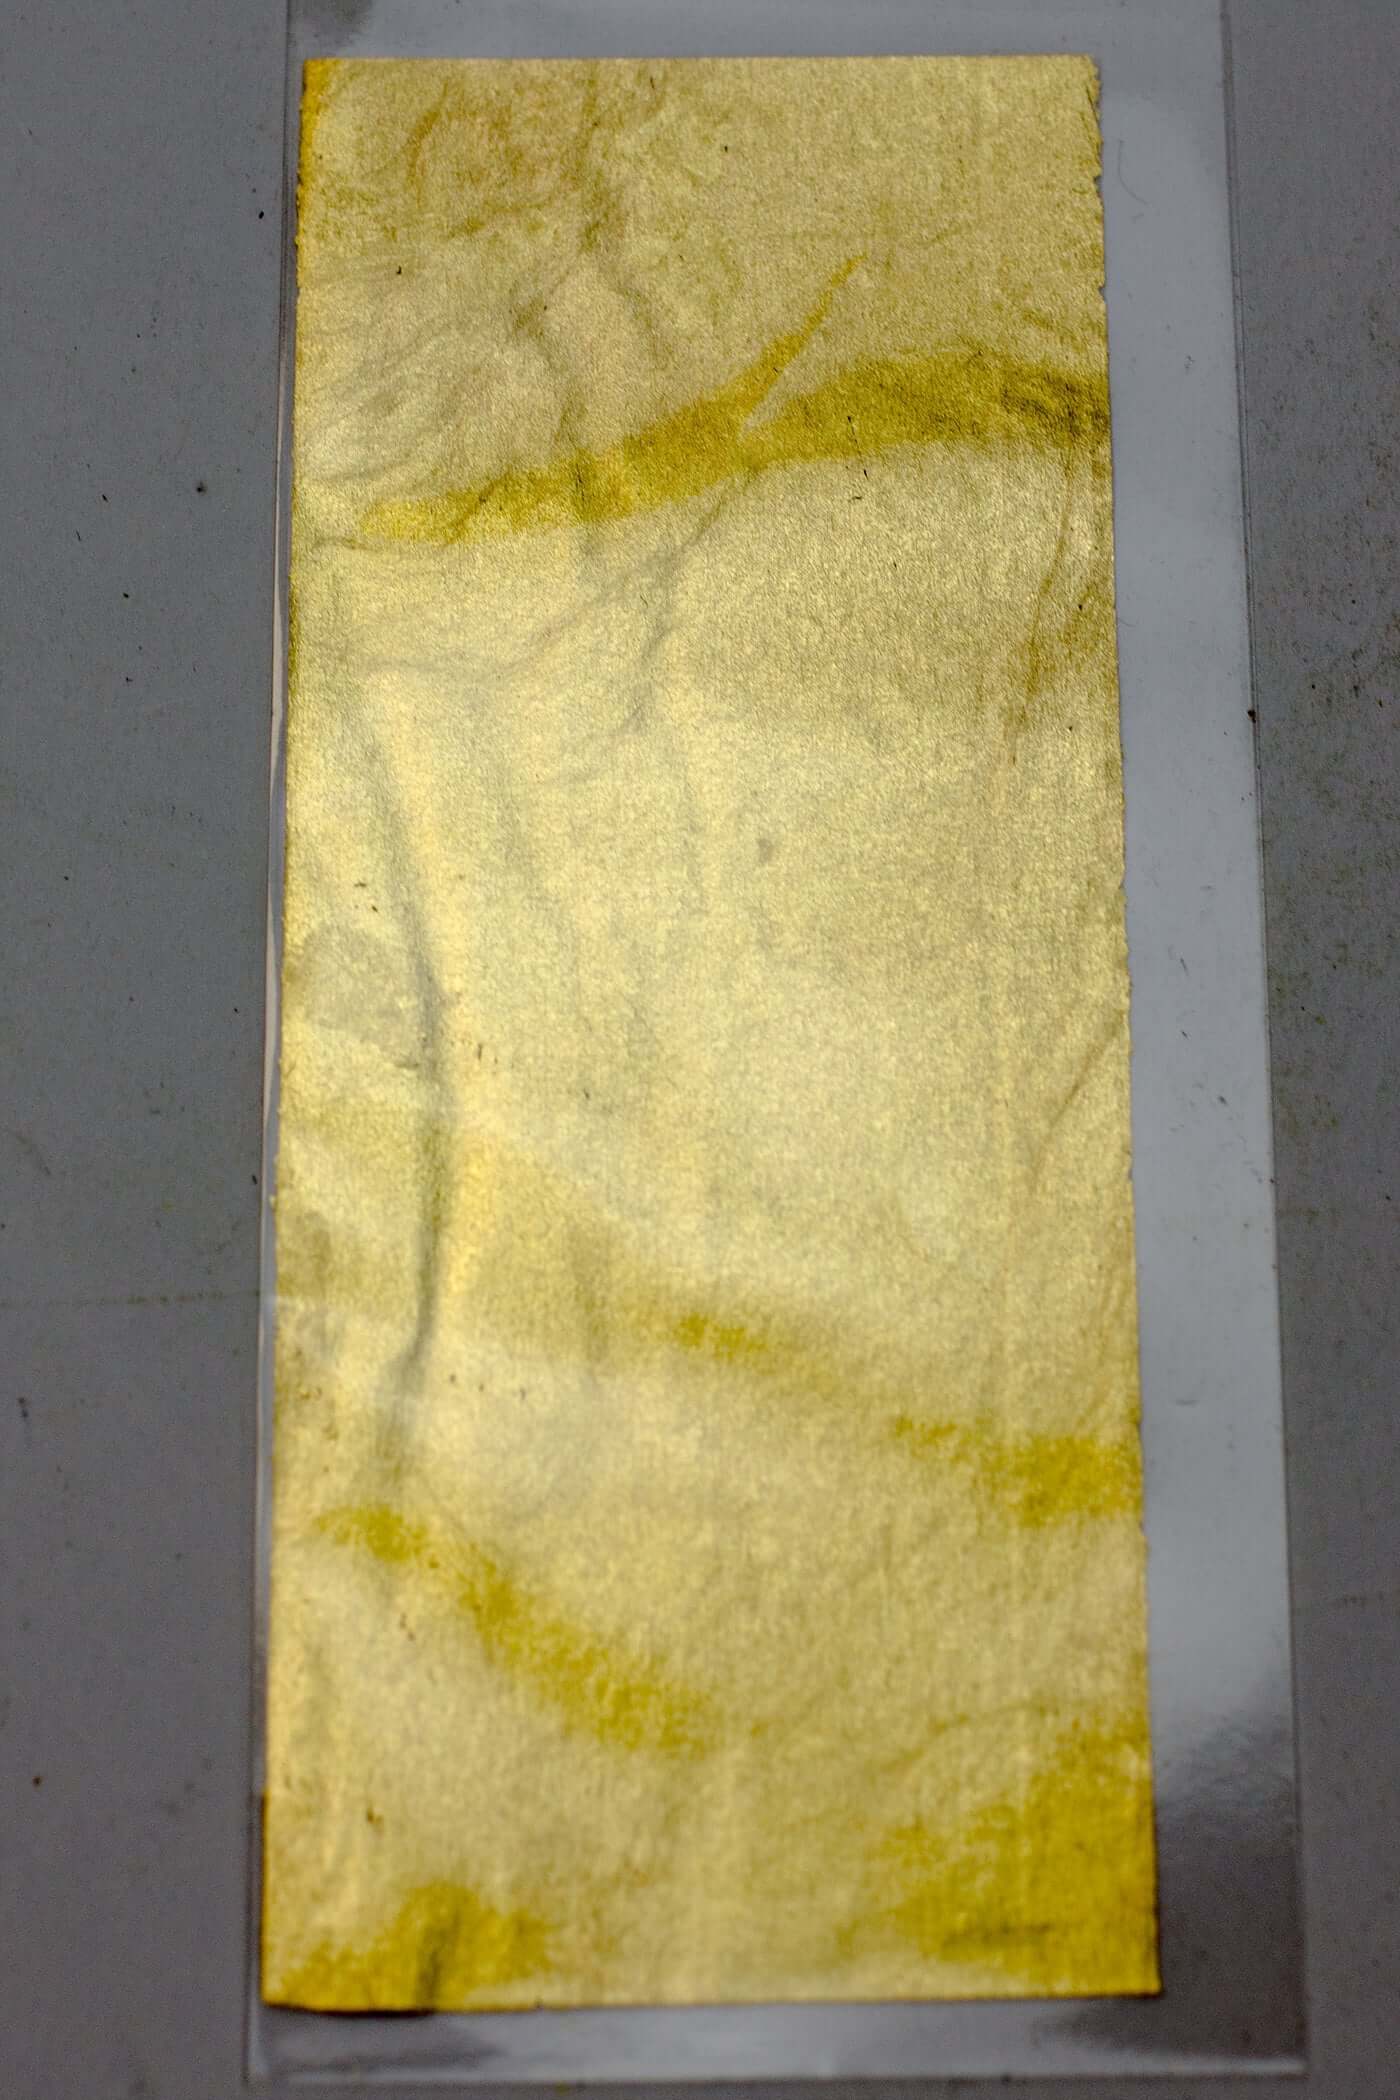 Acid Secs 24K Gold King size Rolling Paper
Acid Secs Productions Inc.
TOP QUALITY PRODUCTIONS. Made with a hemp pulp base and using natural Arabic gum, the ultra-thin paper is then fused with 24K Edible Gold Leaf on the outside. Crafted for an Ultra-Luxurious and Clean Taste. Gold is an inert element and NON-TOXIC. (just think of gold fillings) Size: King-Size (110mm in length) Eligible for $15 Flat Rate Shipping
1-1/4, 100 bucks, 100 dollar, 100% silver, 24K, 24K gold, 24K Gold Rolling Papers, 420, Accesso